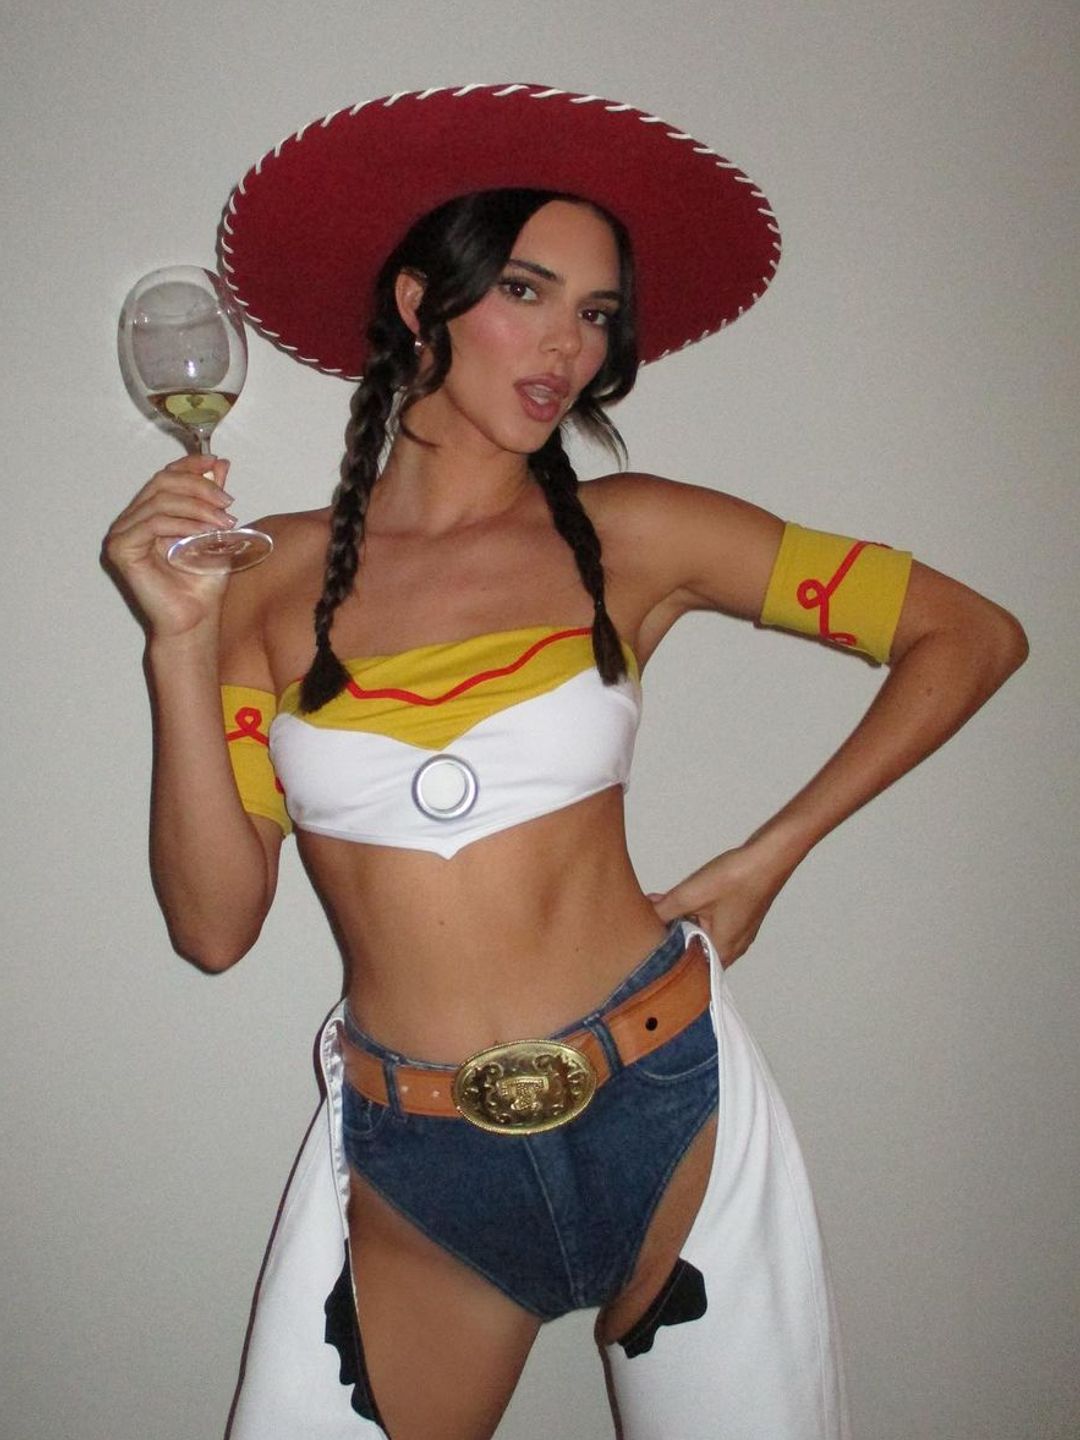 Kendall Jenner wearing a cowboy outfit